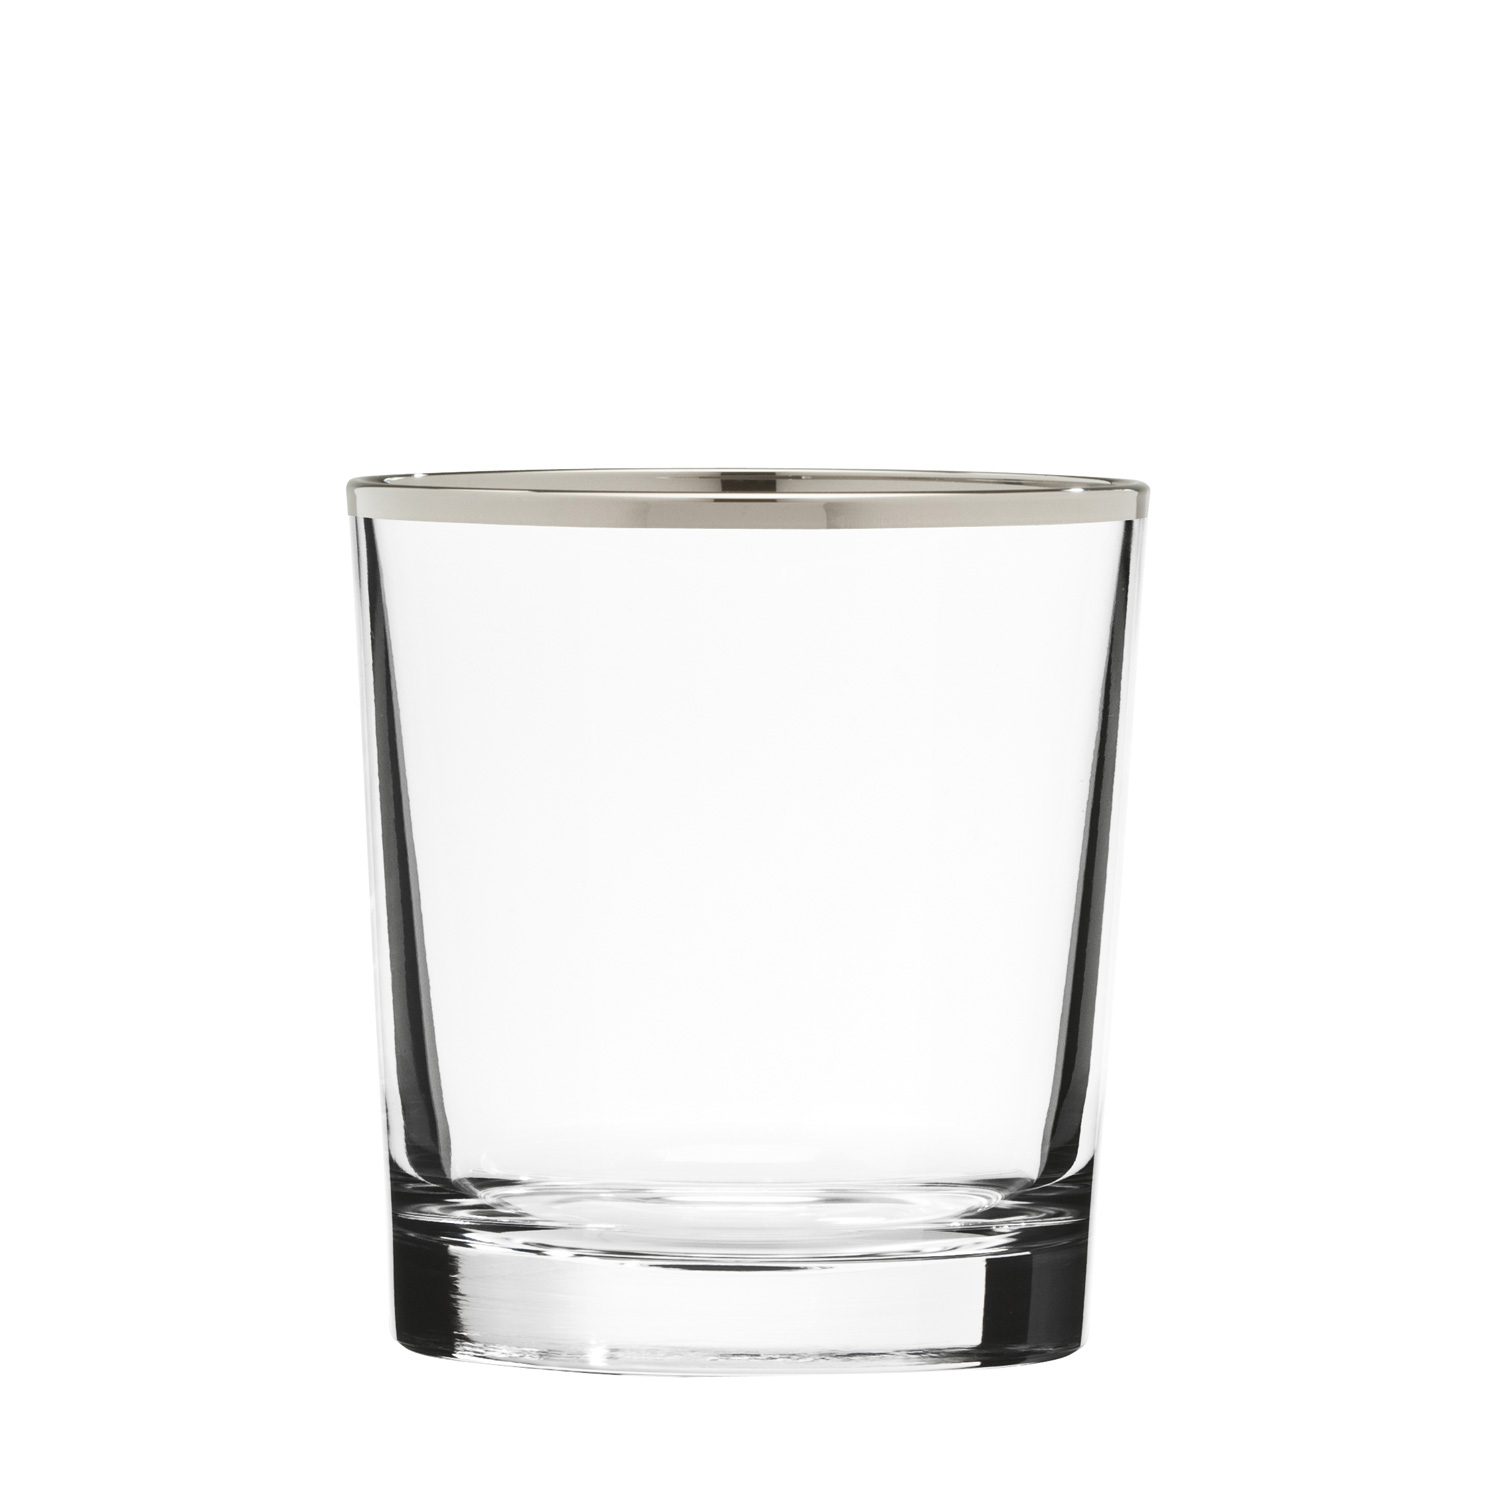 Whiskyglas Kristall Pure Platin clear (9,3 cm)